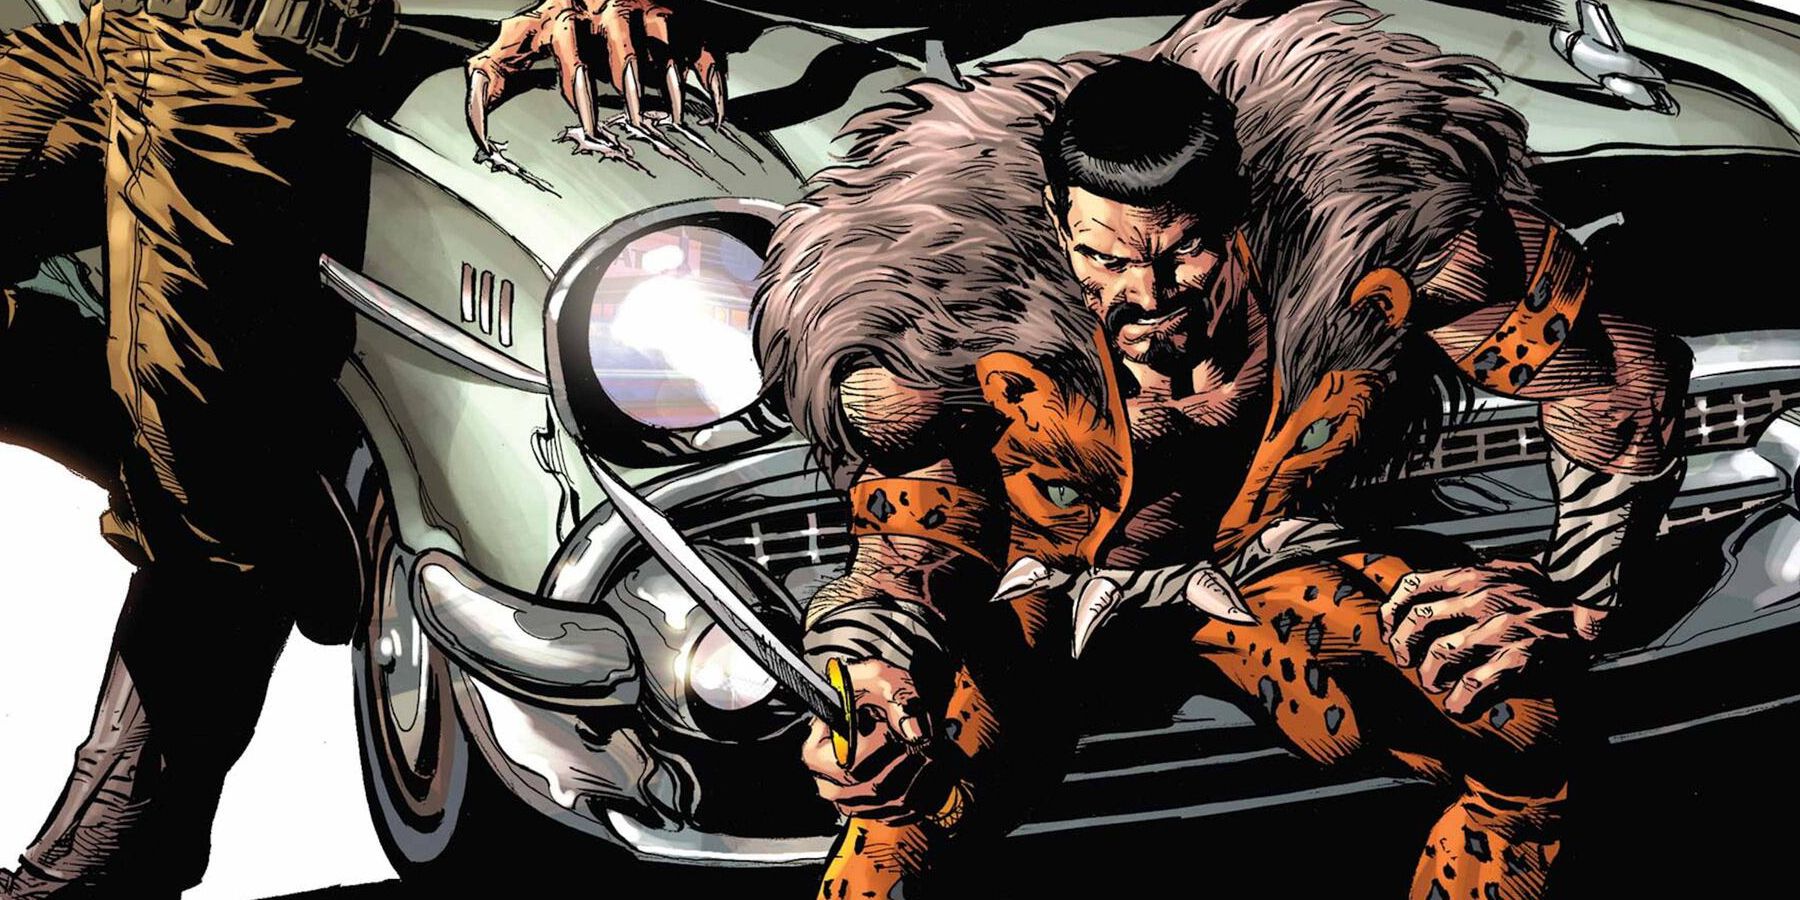 Kraven the Hunter posed in front of a car in the 1950s.